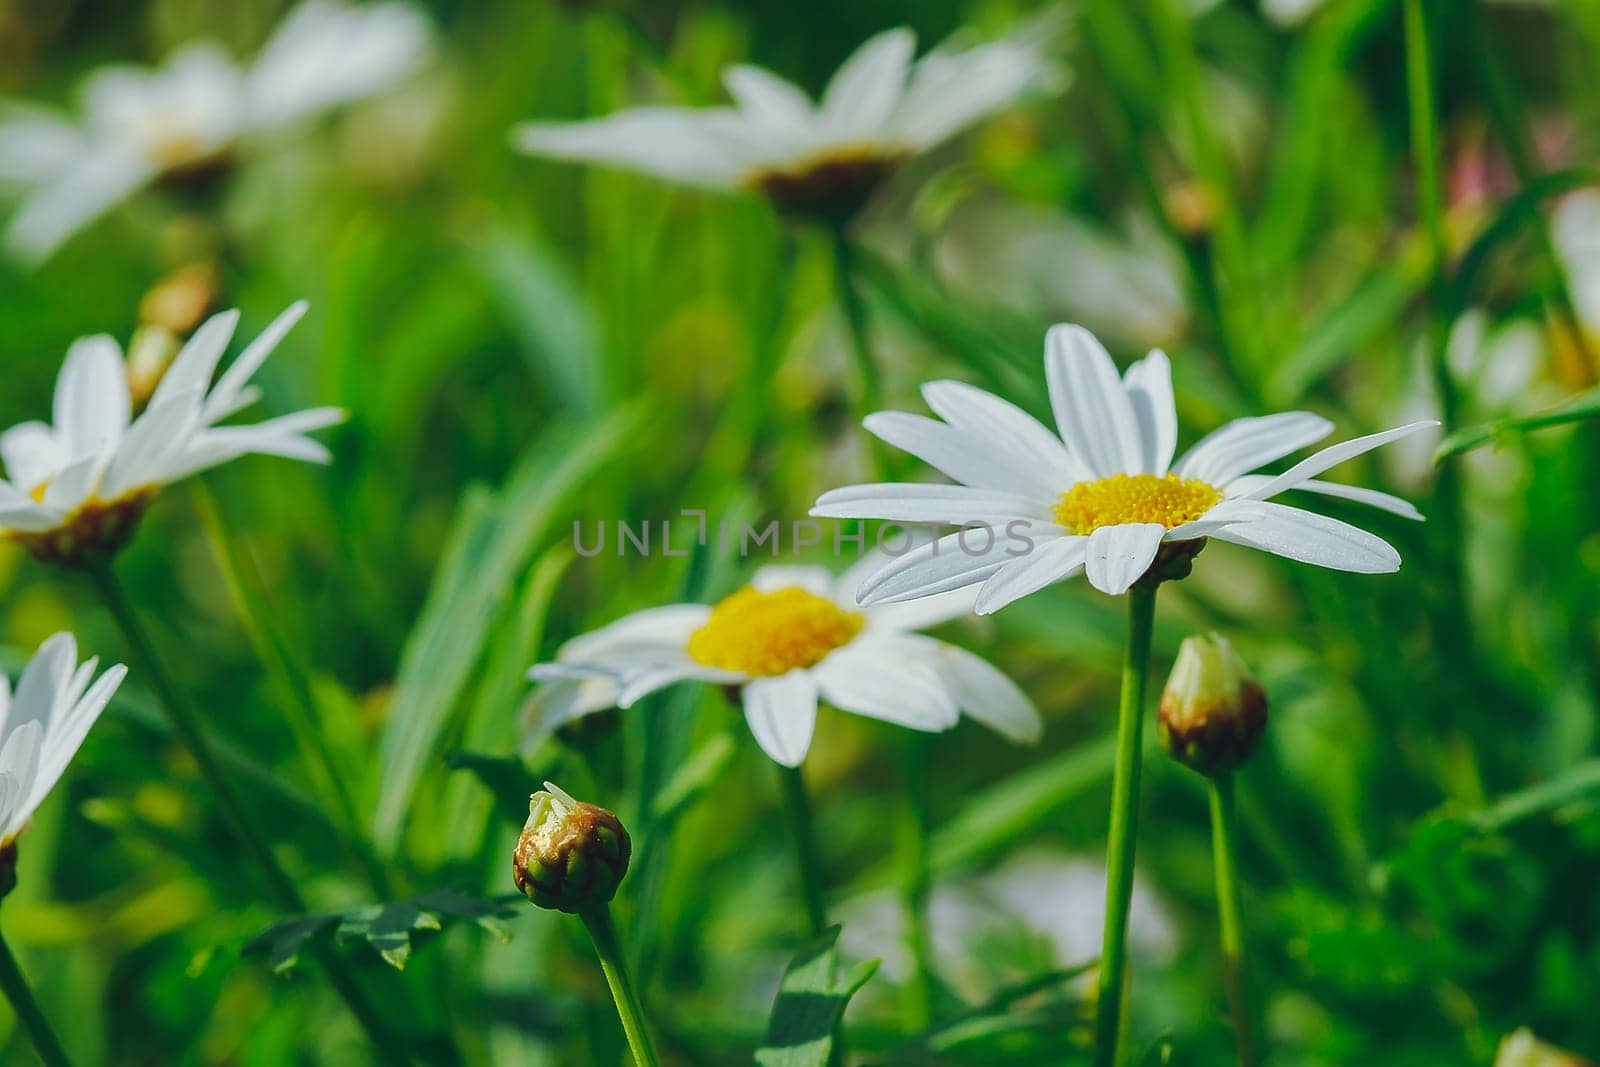 White daisy flower in the garden is blooming by Puripatt